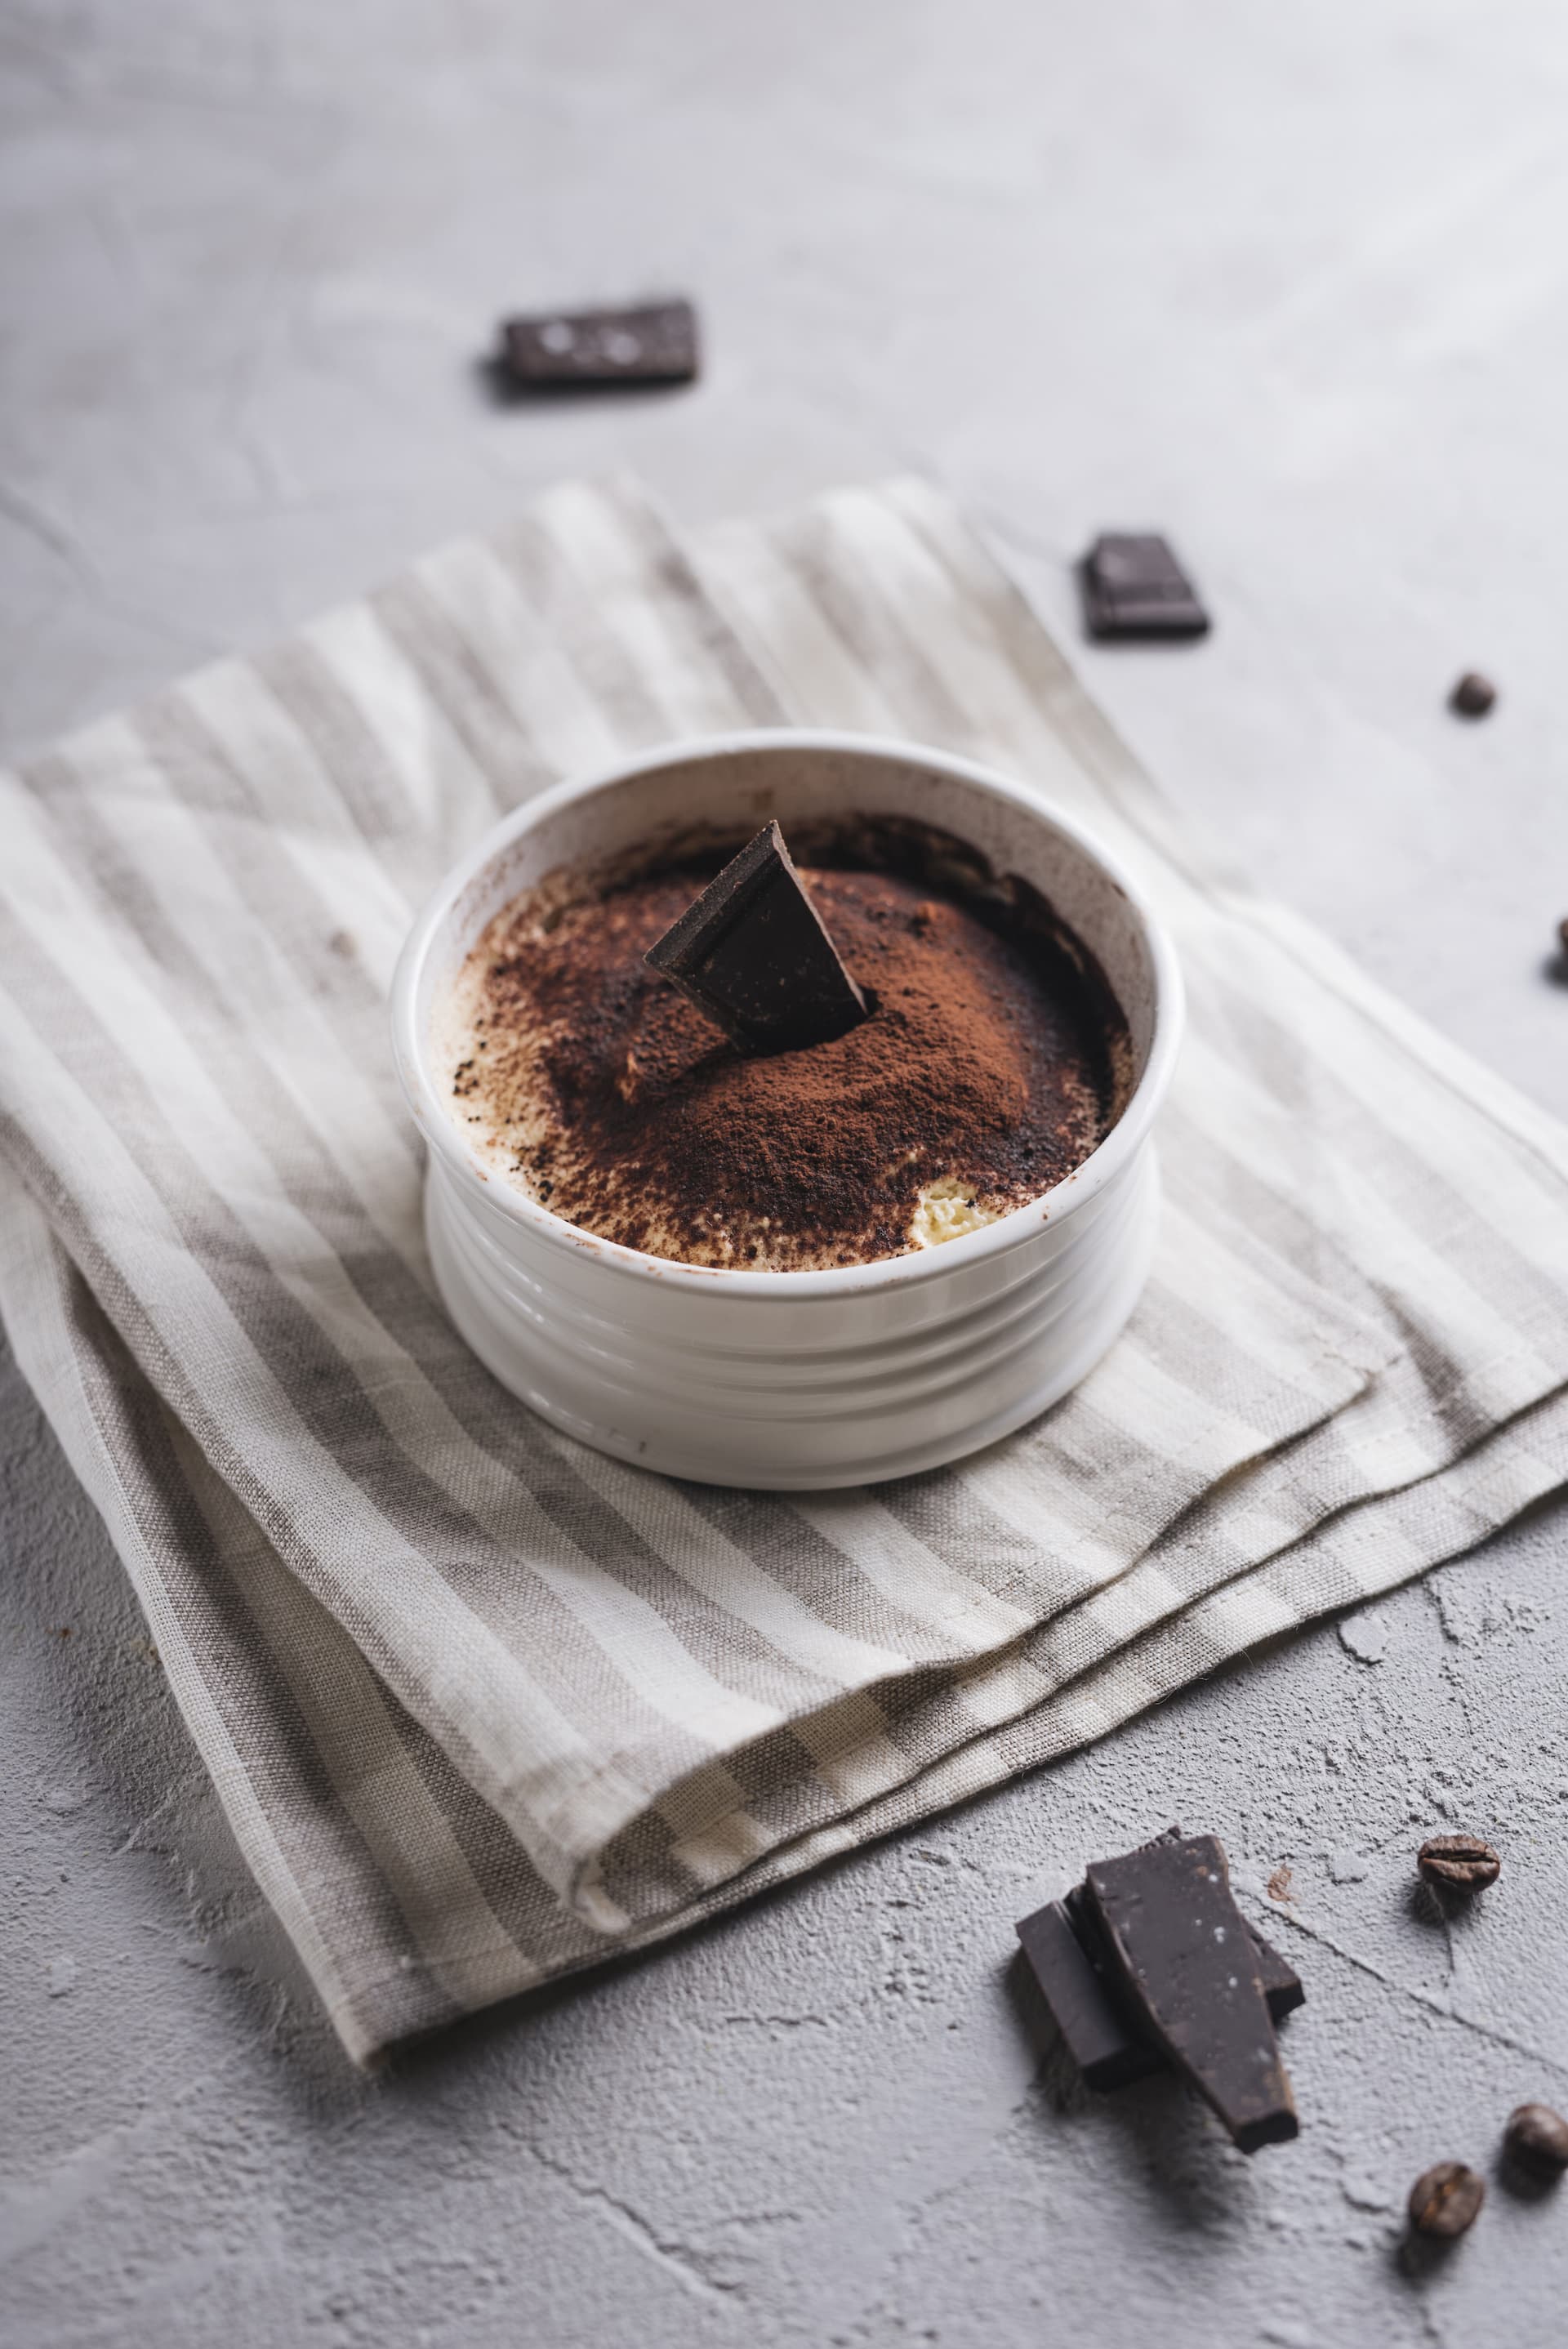 Johnnie Walker Dark Chocolate Pudding: Do Try This At Home!